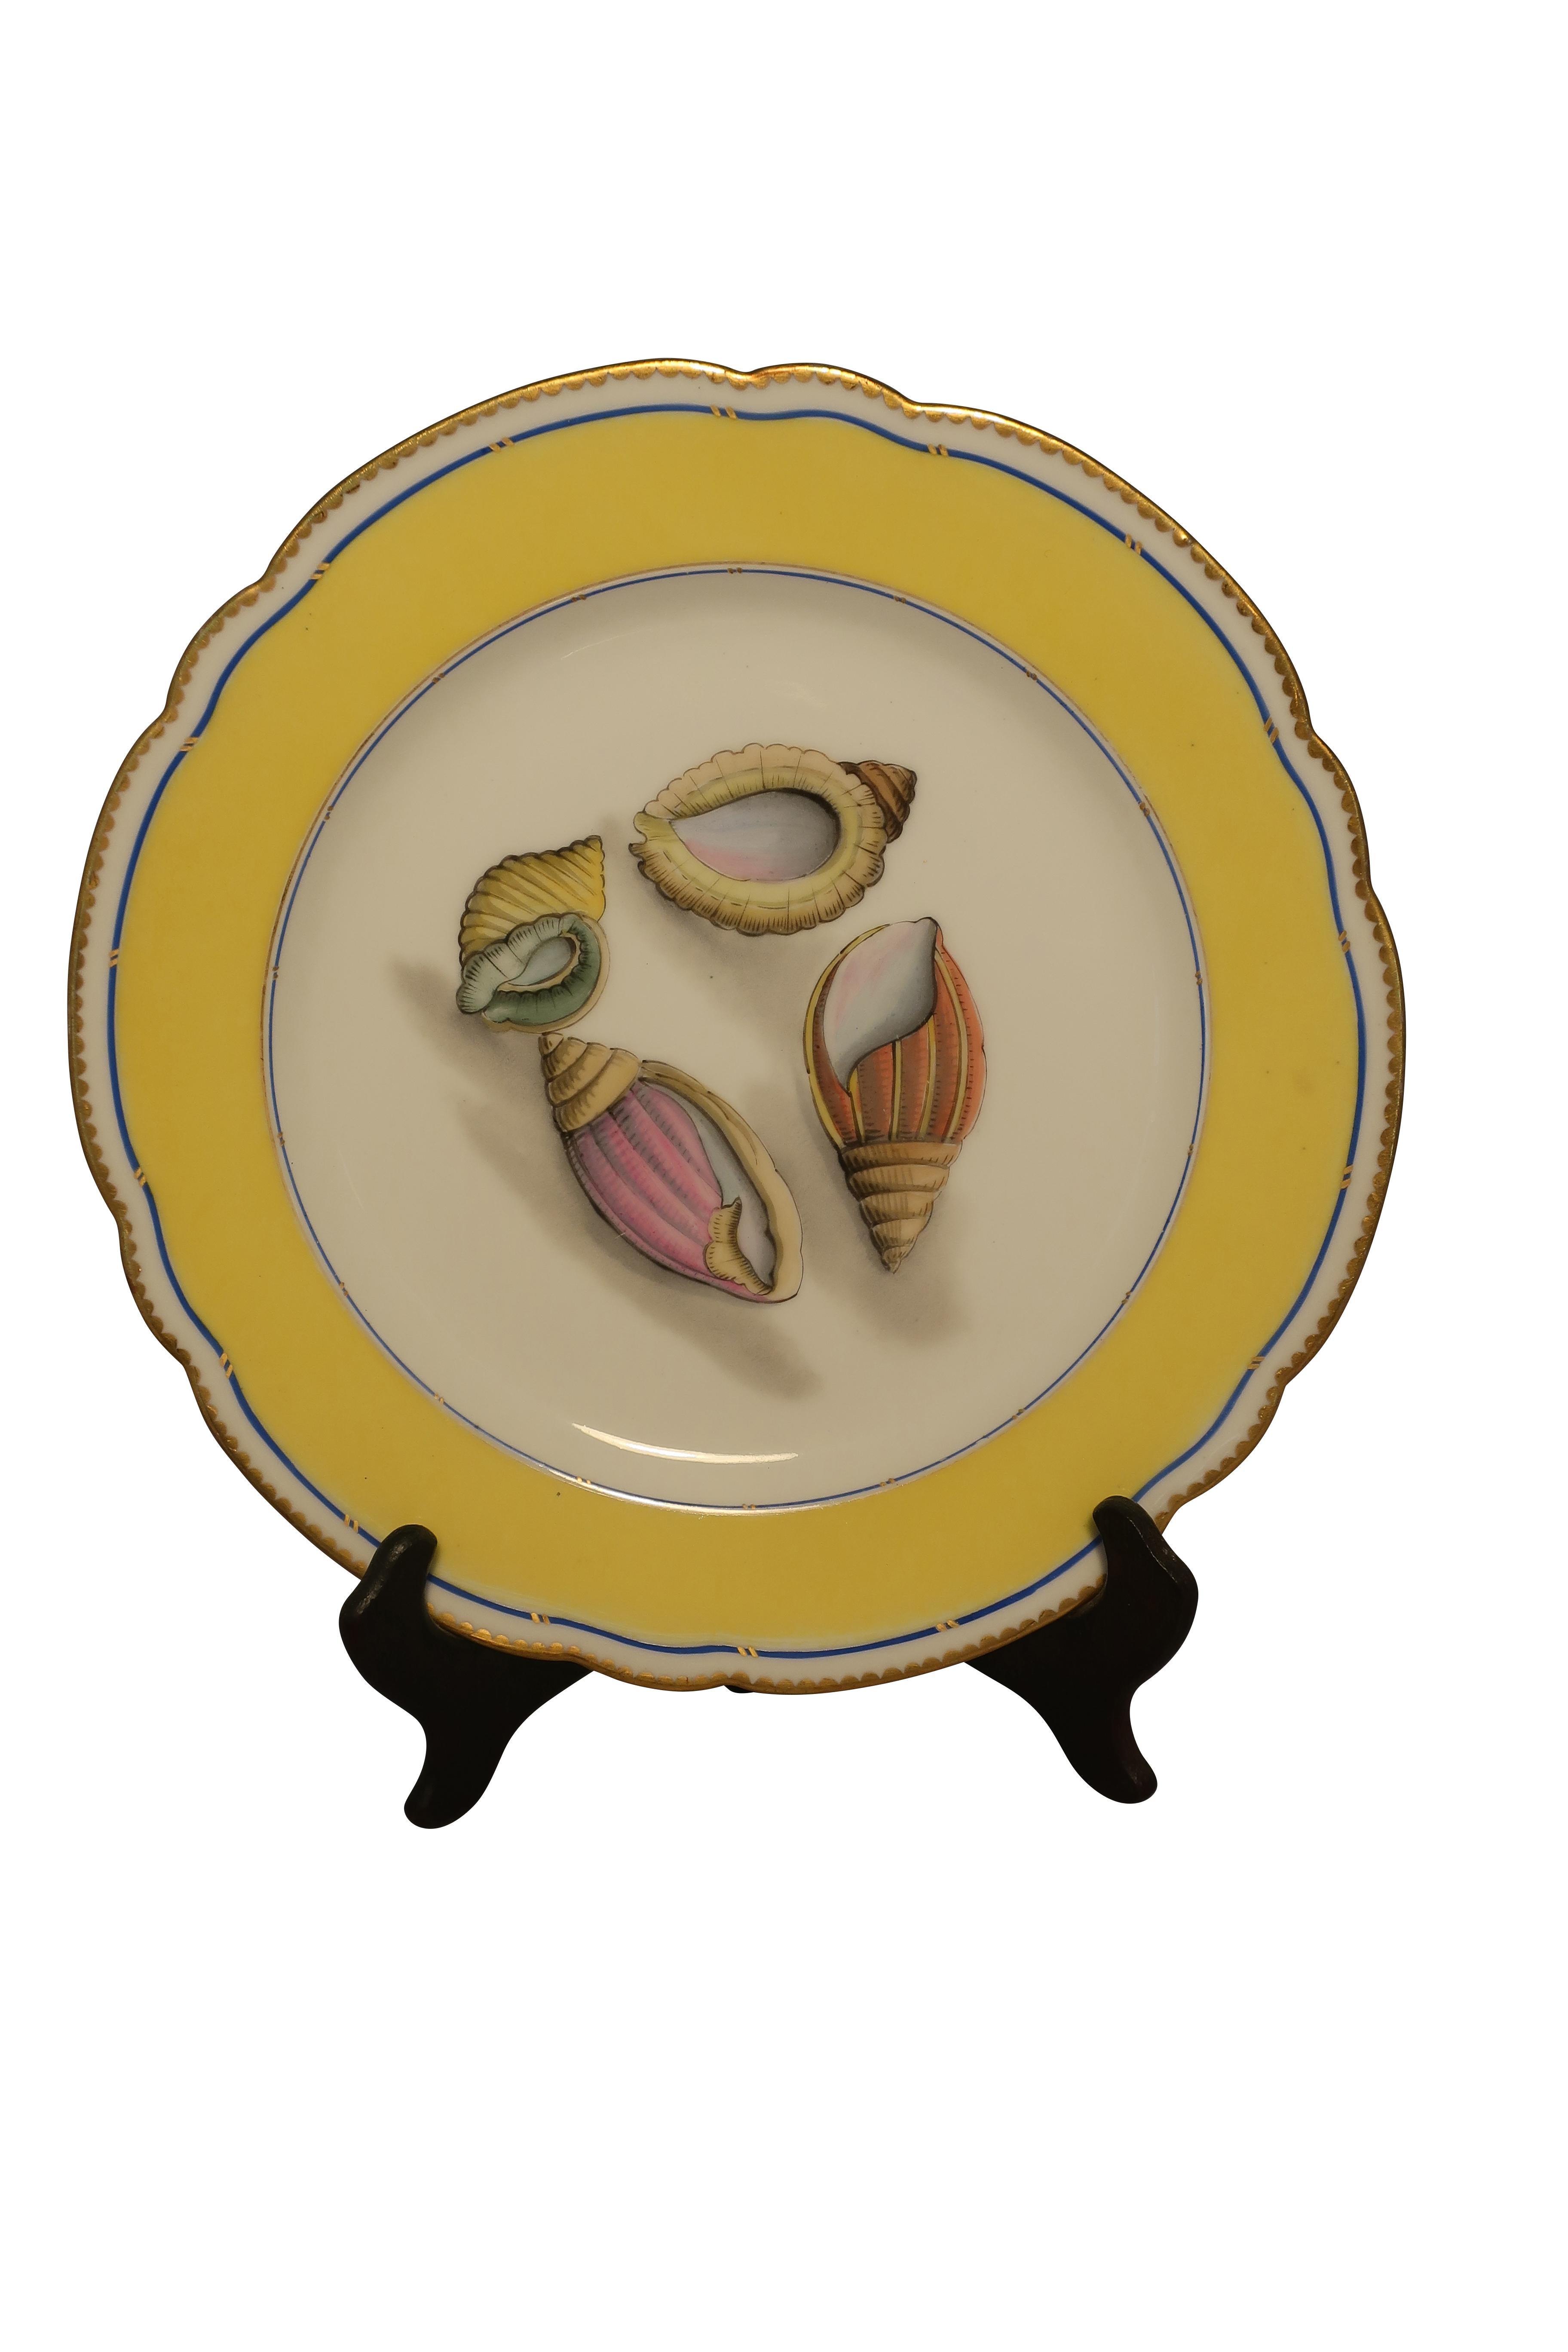 Sea Shell Porcelain Plates French Rousseau, Set of 6 or 12 1